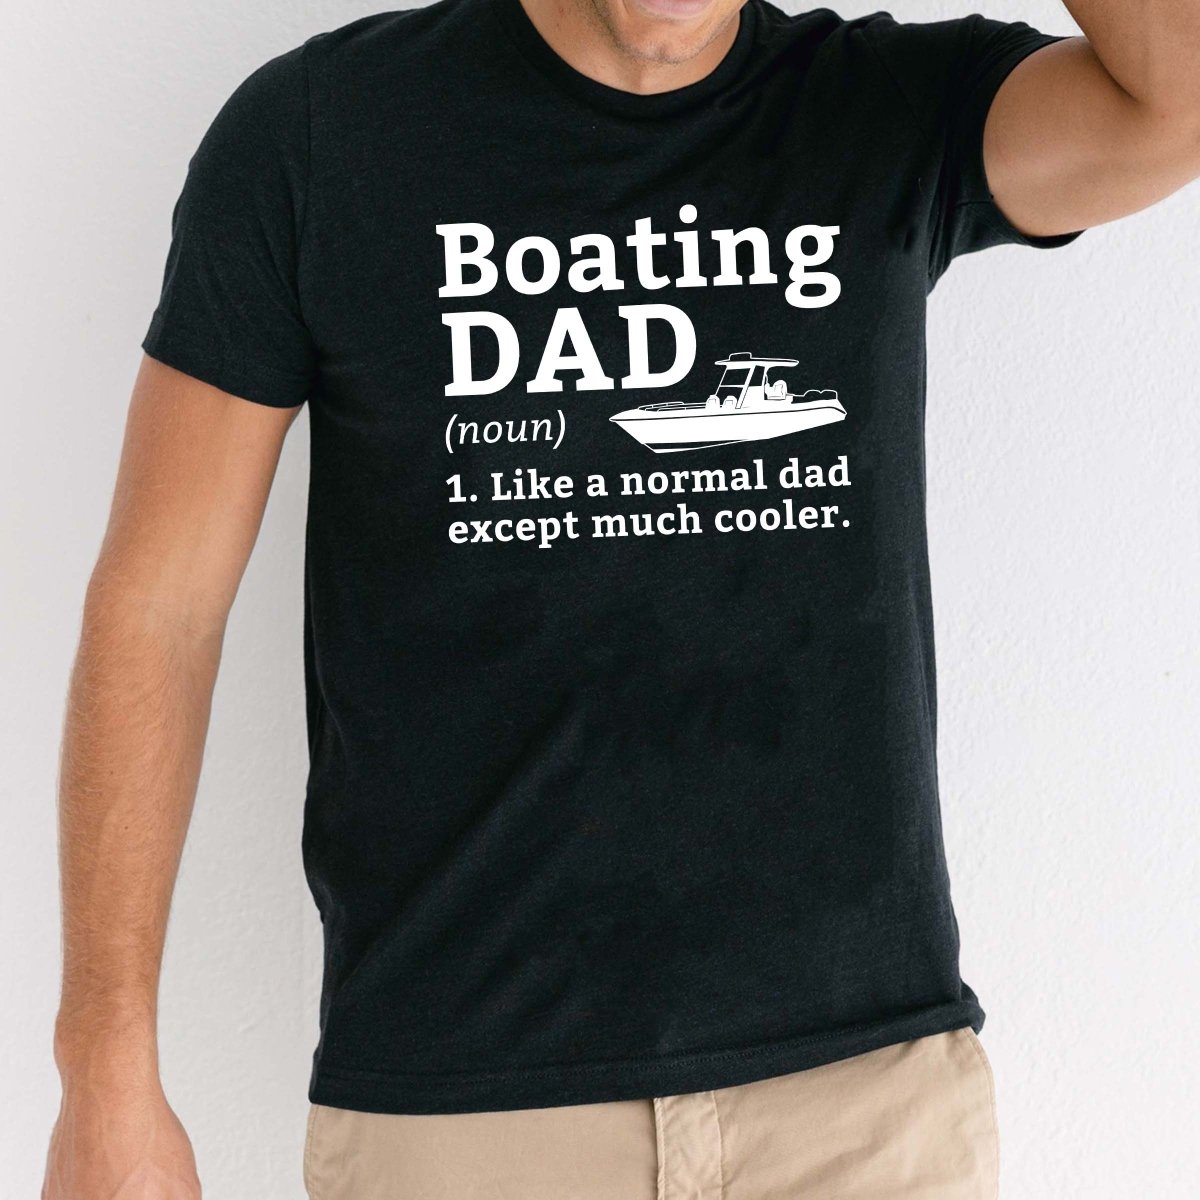 Boating Dad Tee - Limeberry Designs